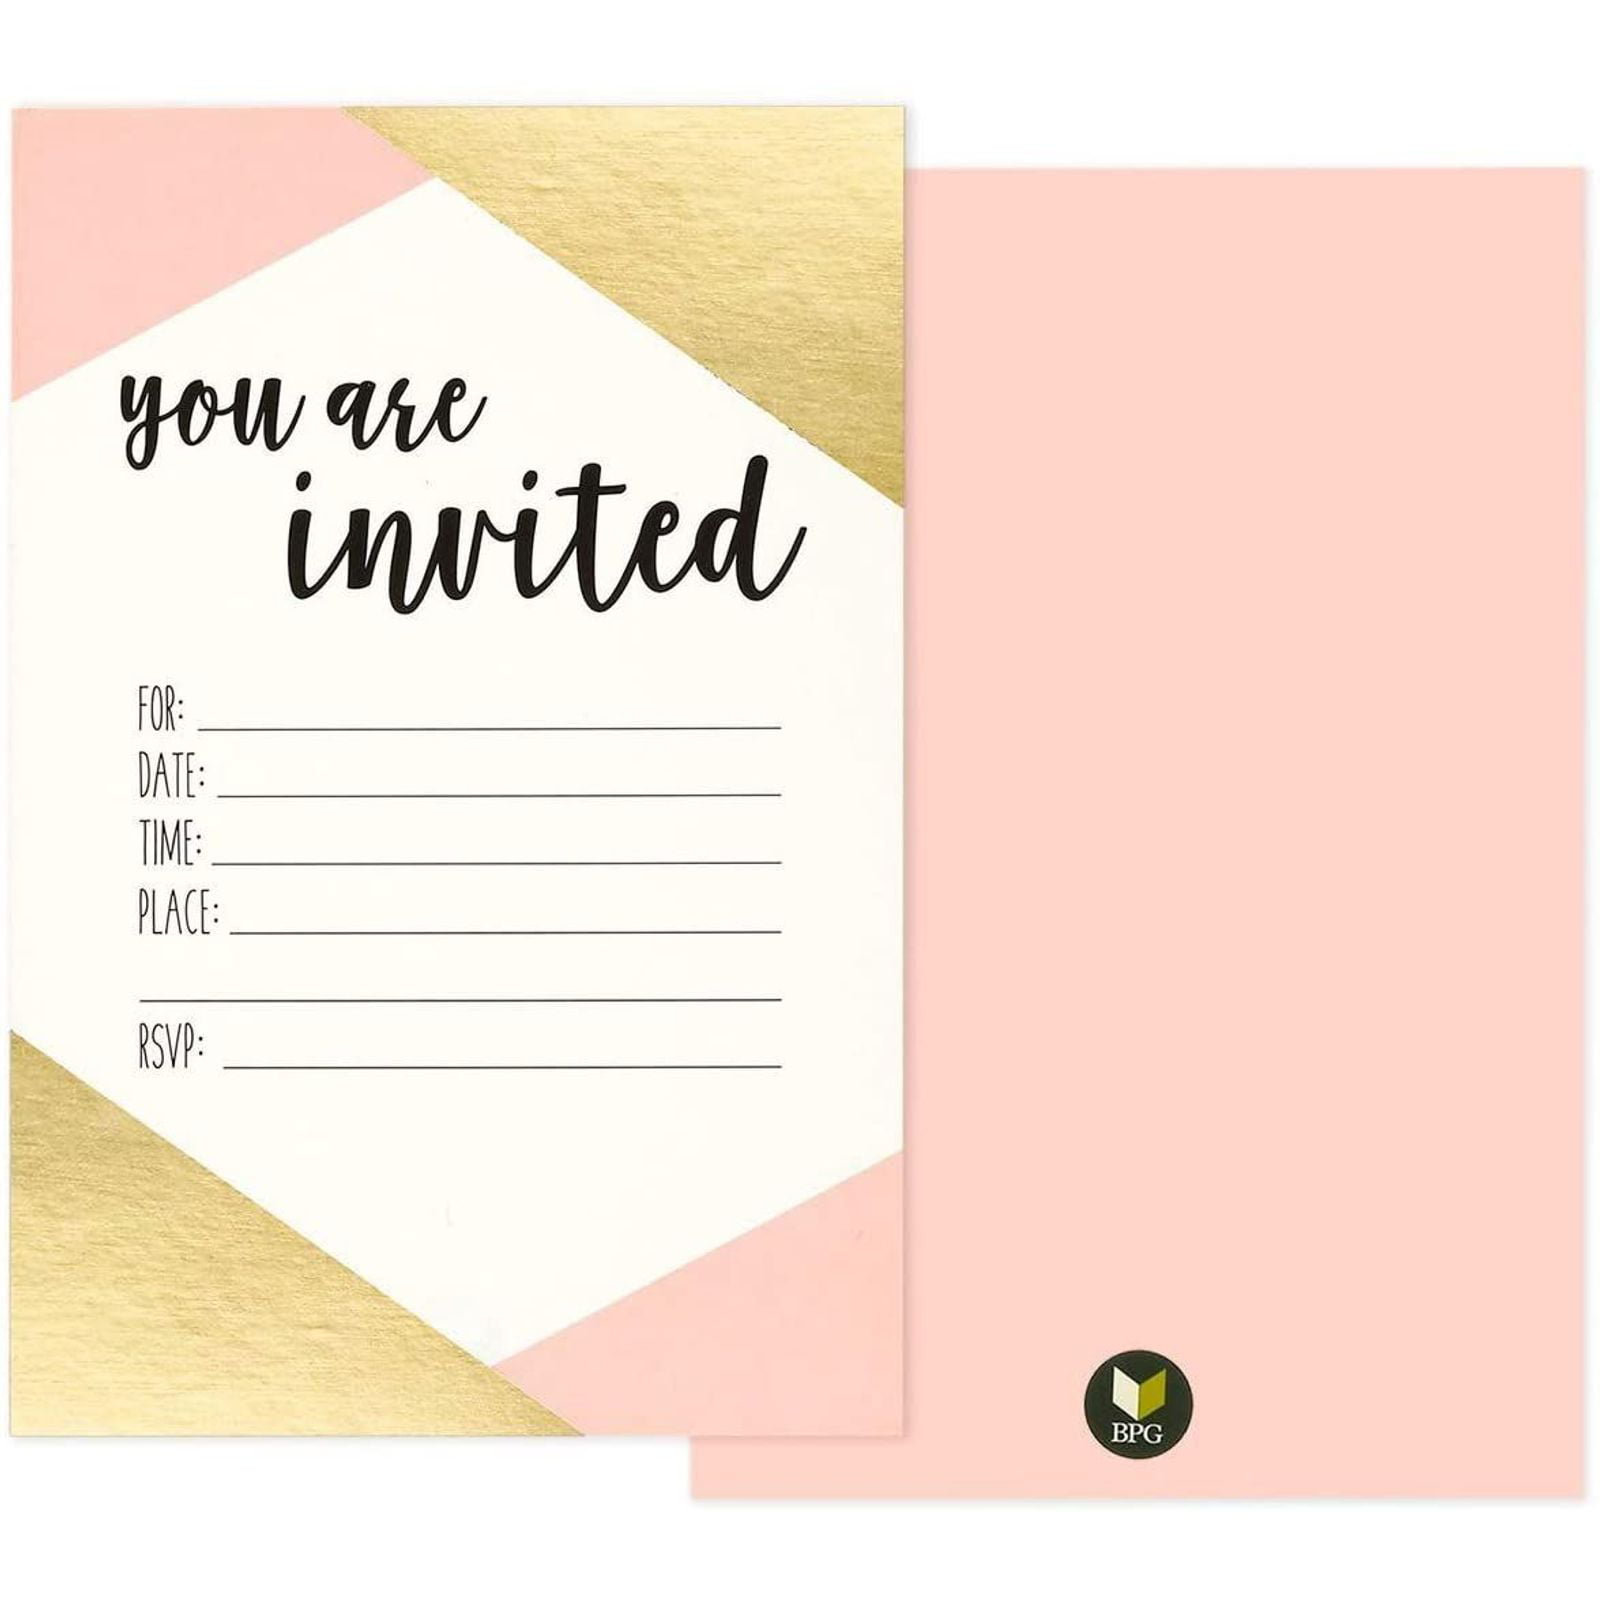 Pack of 36 90th Birthday Party Invitations with Envelopes 